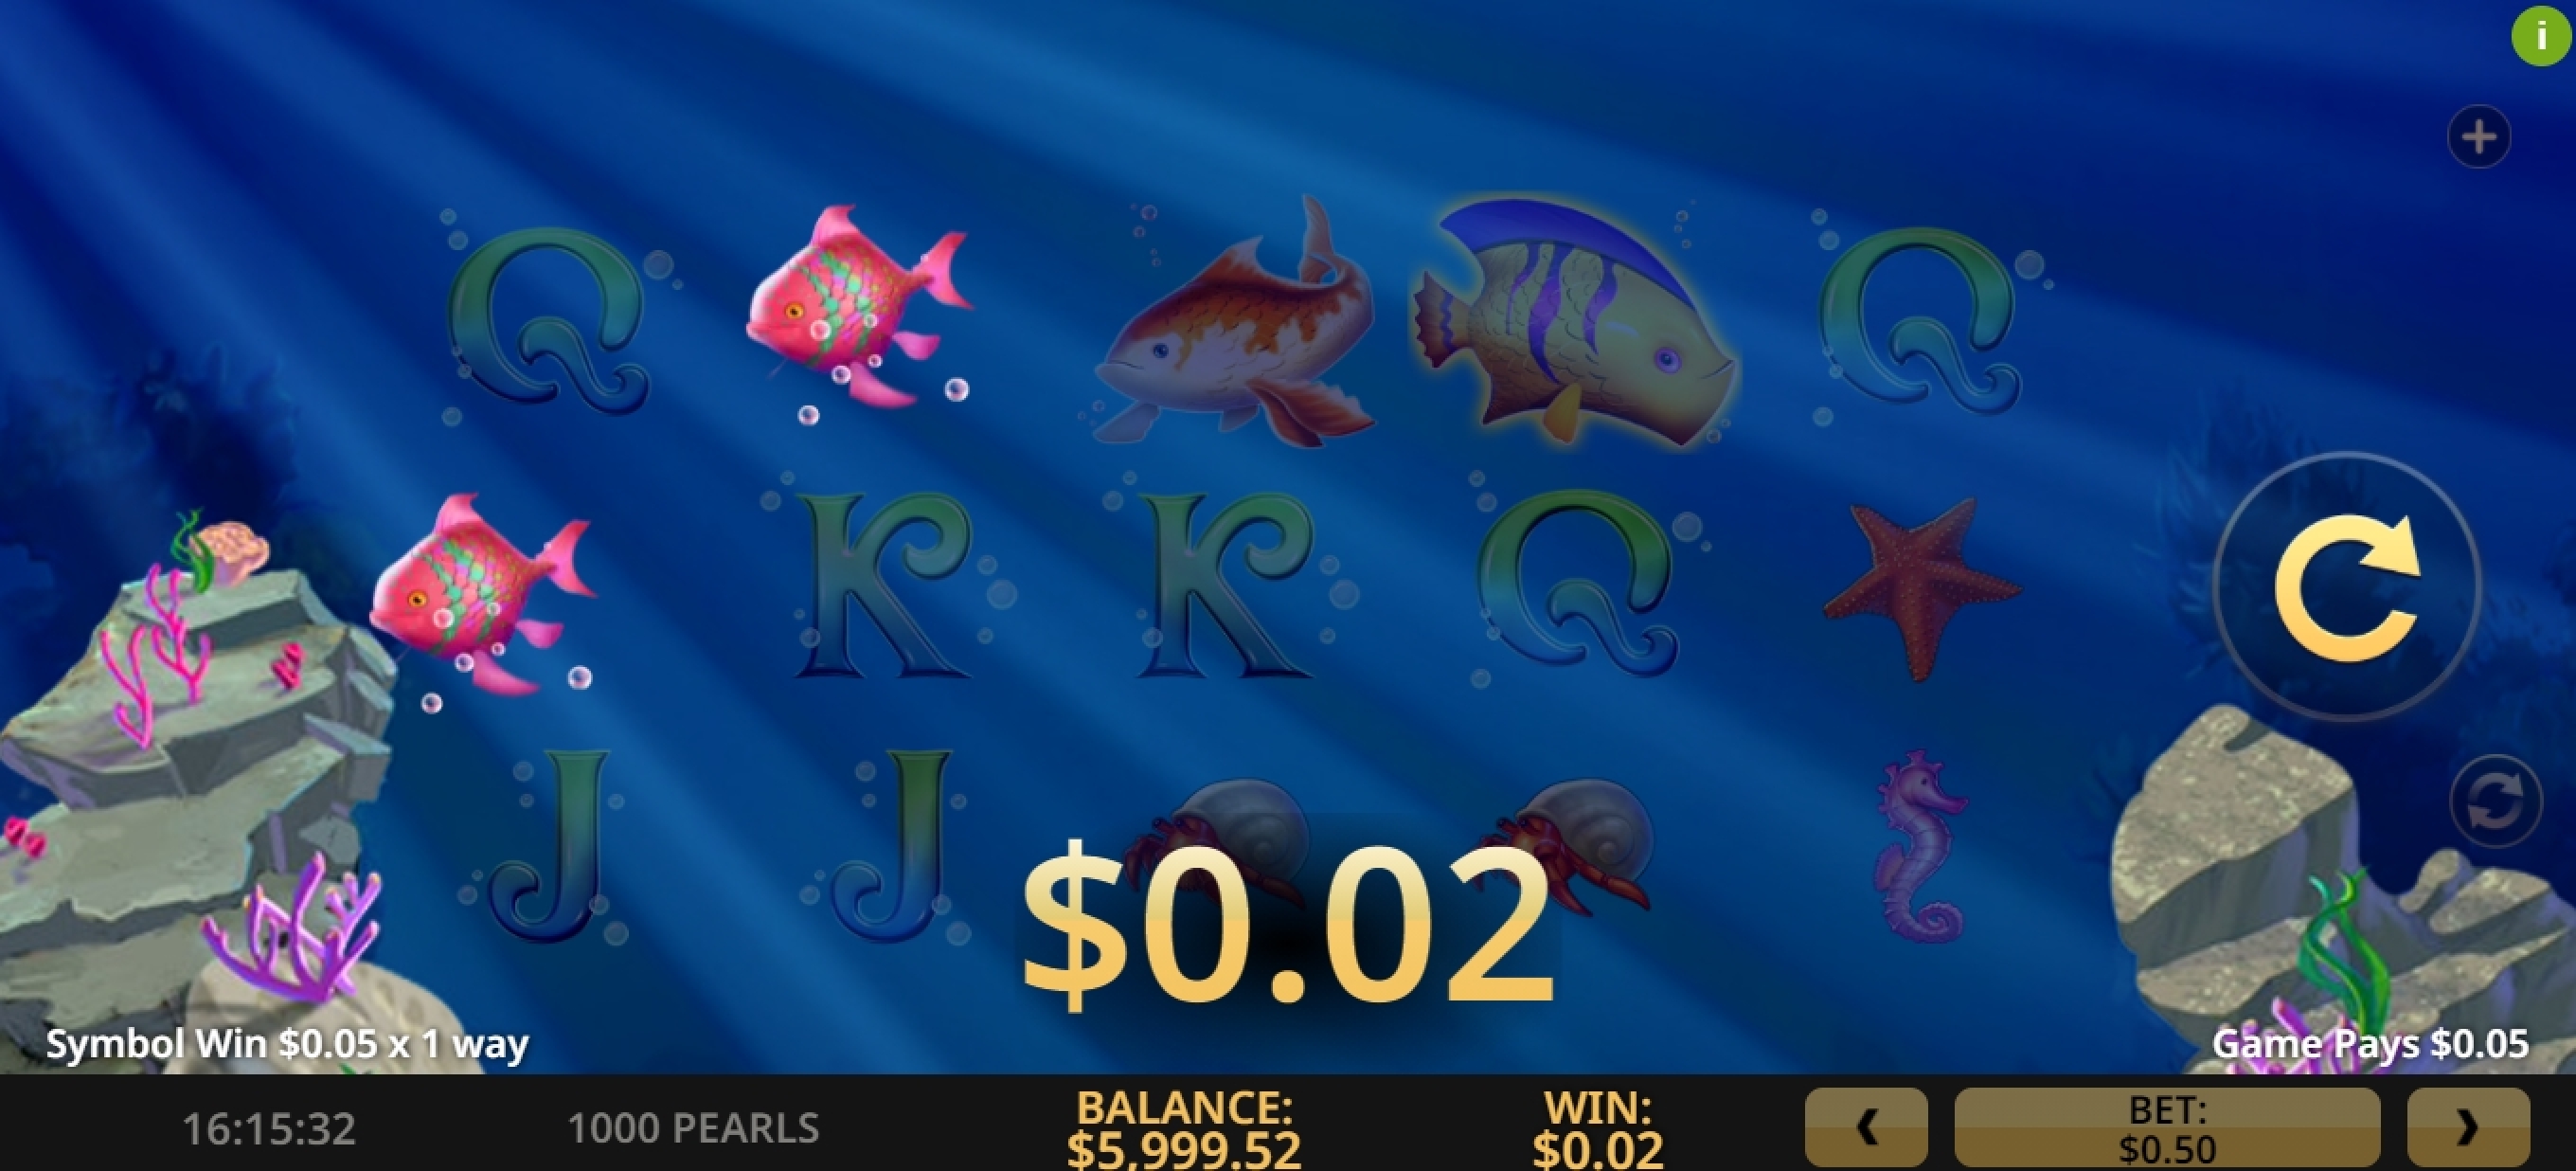 Win Money in 1000 Pearls Free Slot Game by High 5 Games